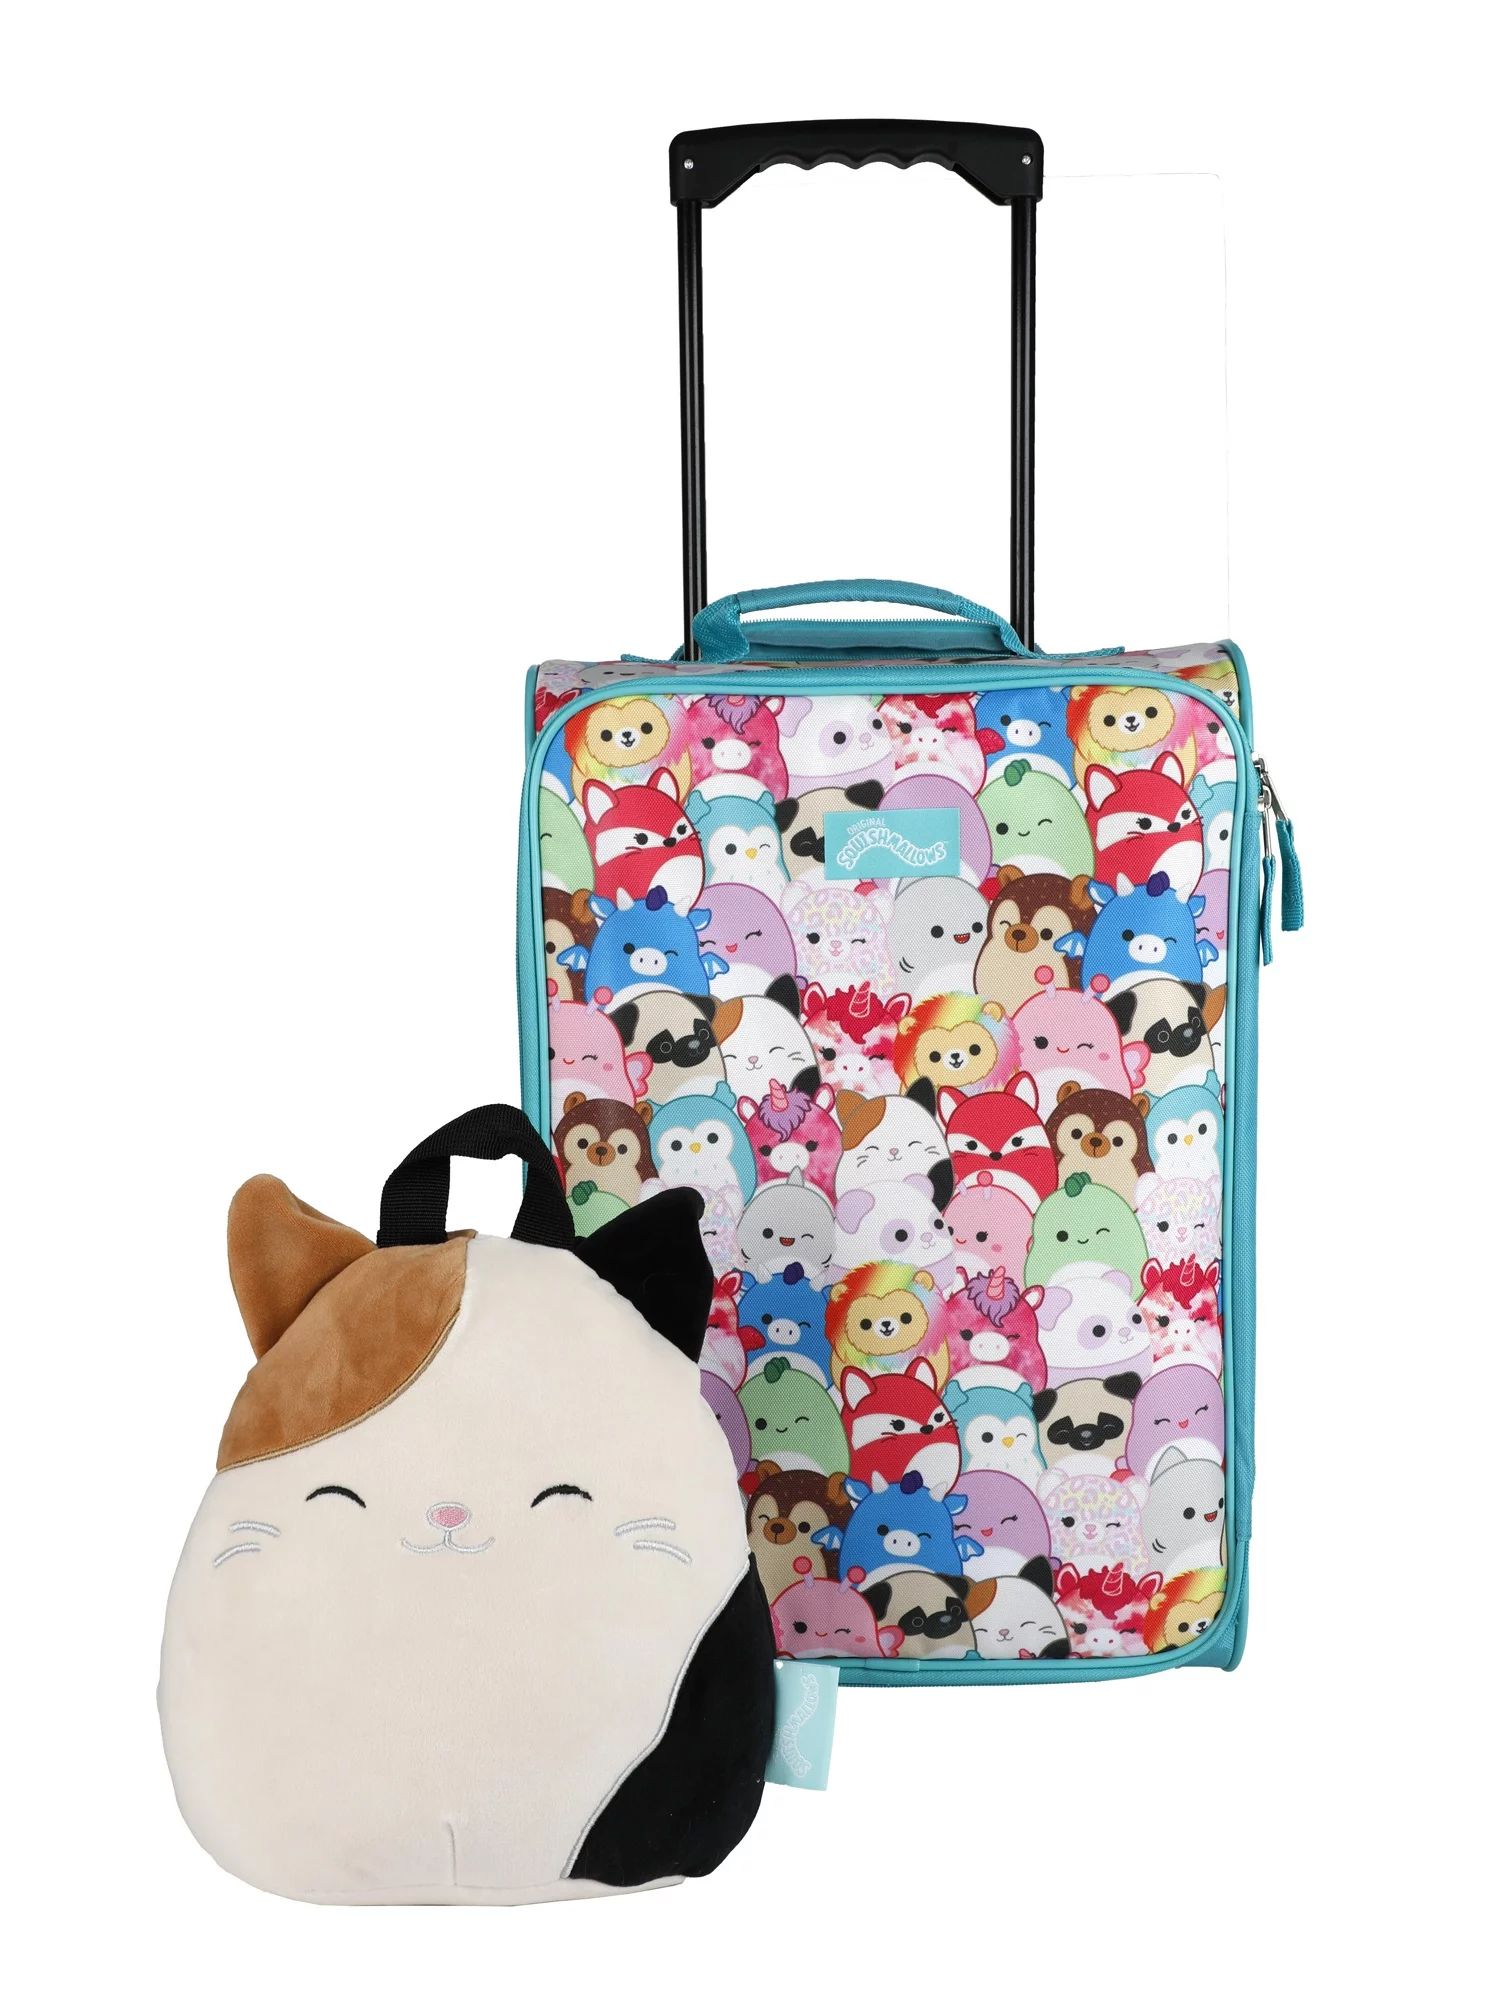 Squishmallows Cameron Cat 2pc  Travel Set with 18" Luggage and 10" Plush Backpack | Walmart (US)